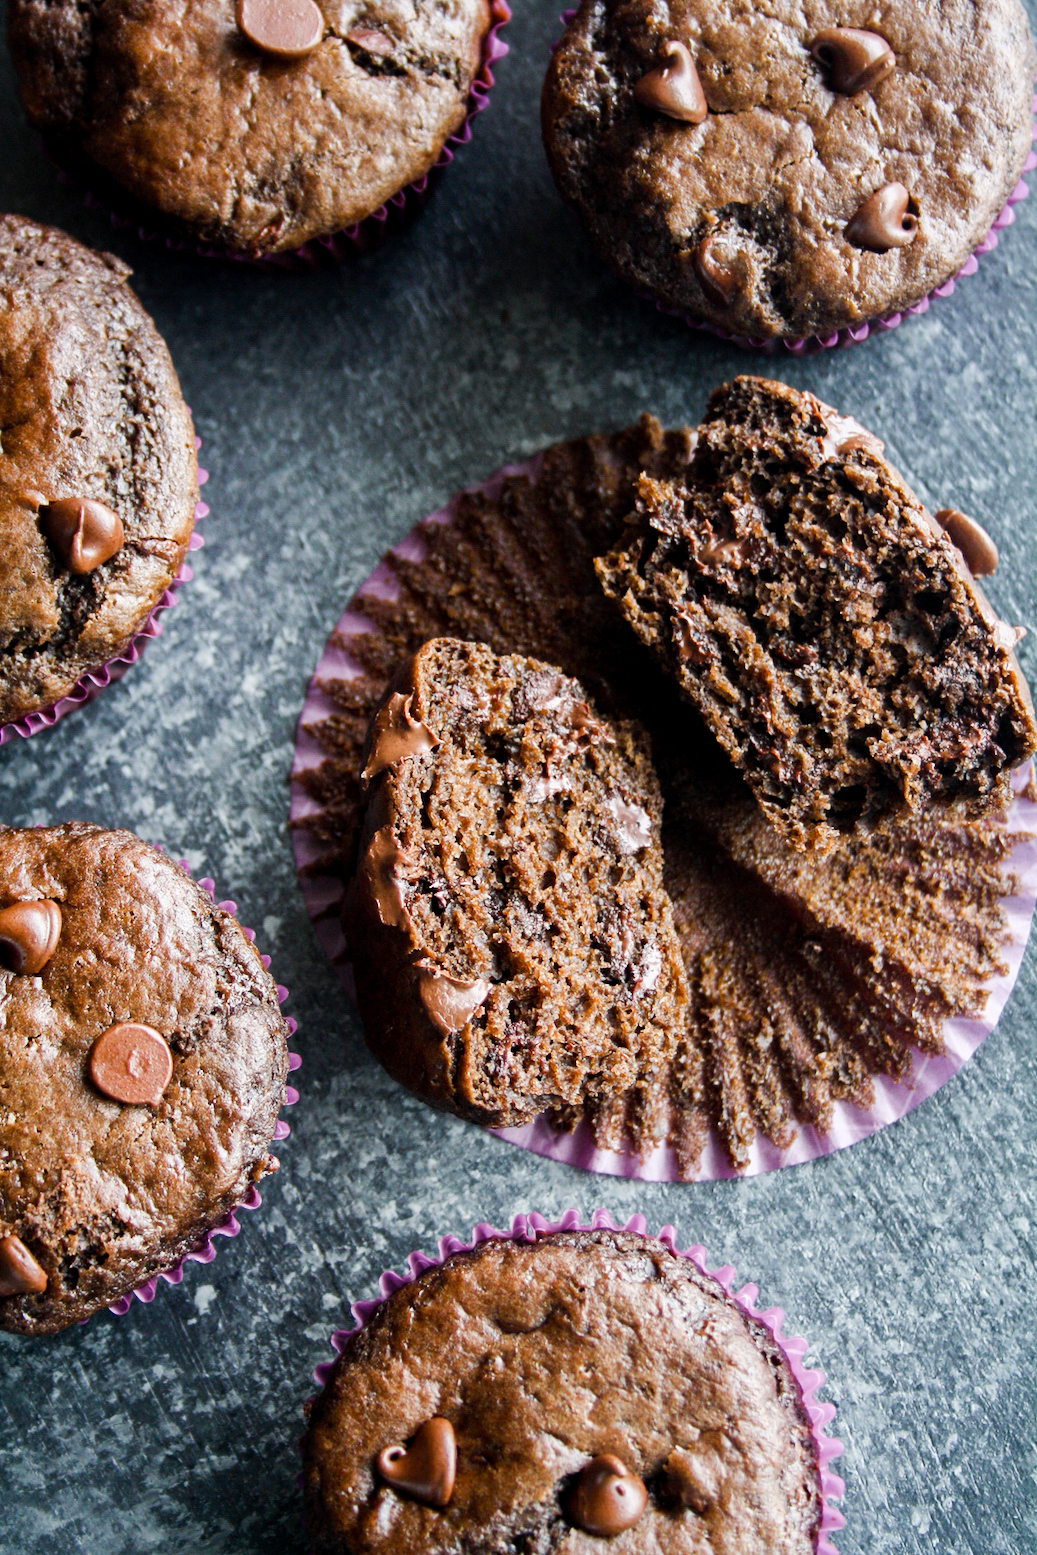 Moist and soft chocolate muffins with lots of chocolate chips